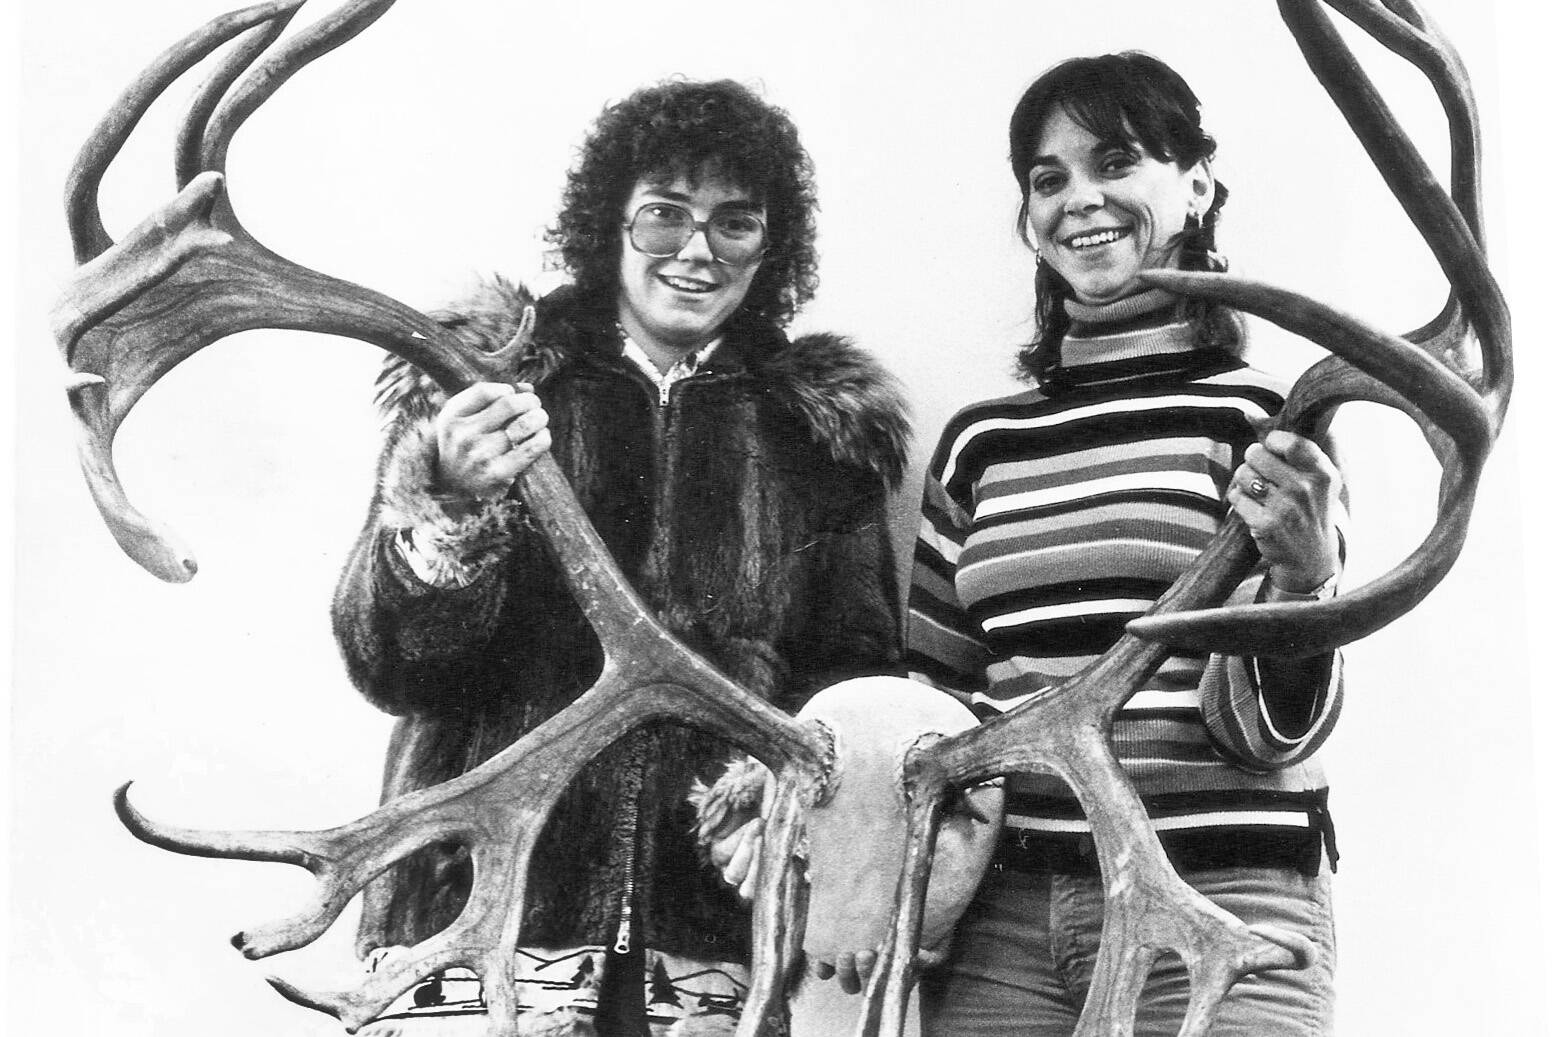 Marcia and Mary Alice Grainge pose in 1980 with a pair of caribou antlers they found in 1972. The sisters dug the antlers from deep snow and detached them from a dead caribou. (Photo provided by Marcia Grainge King)